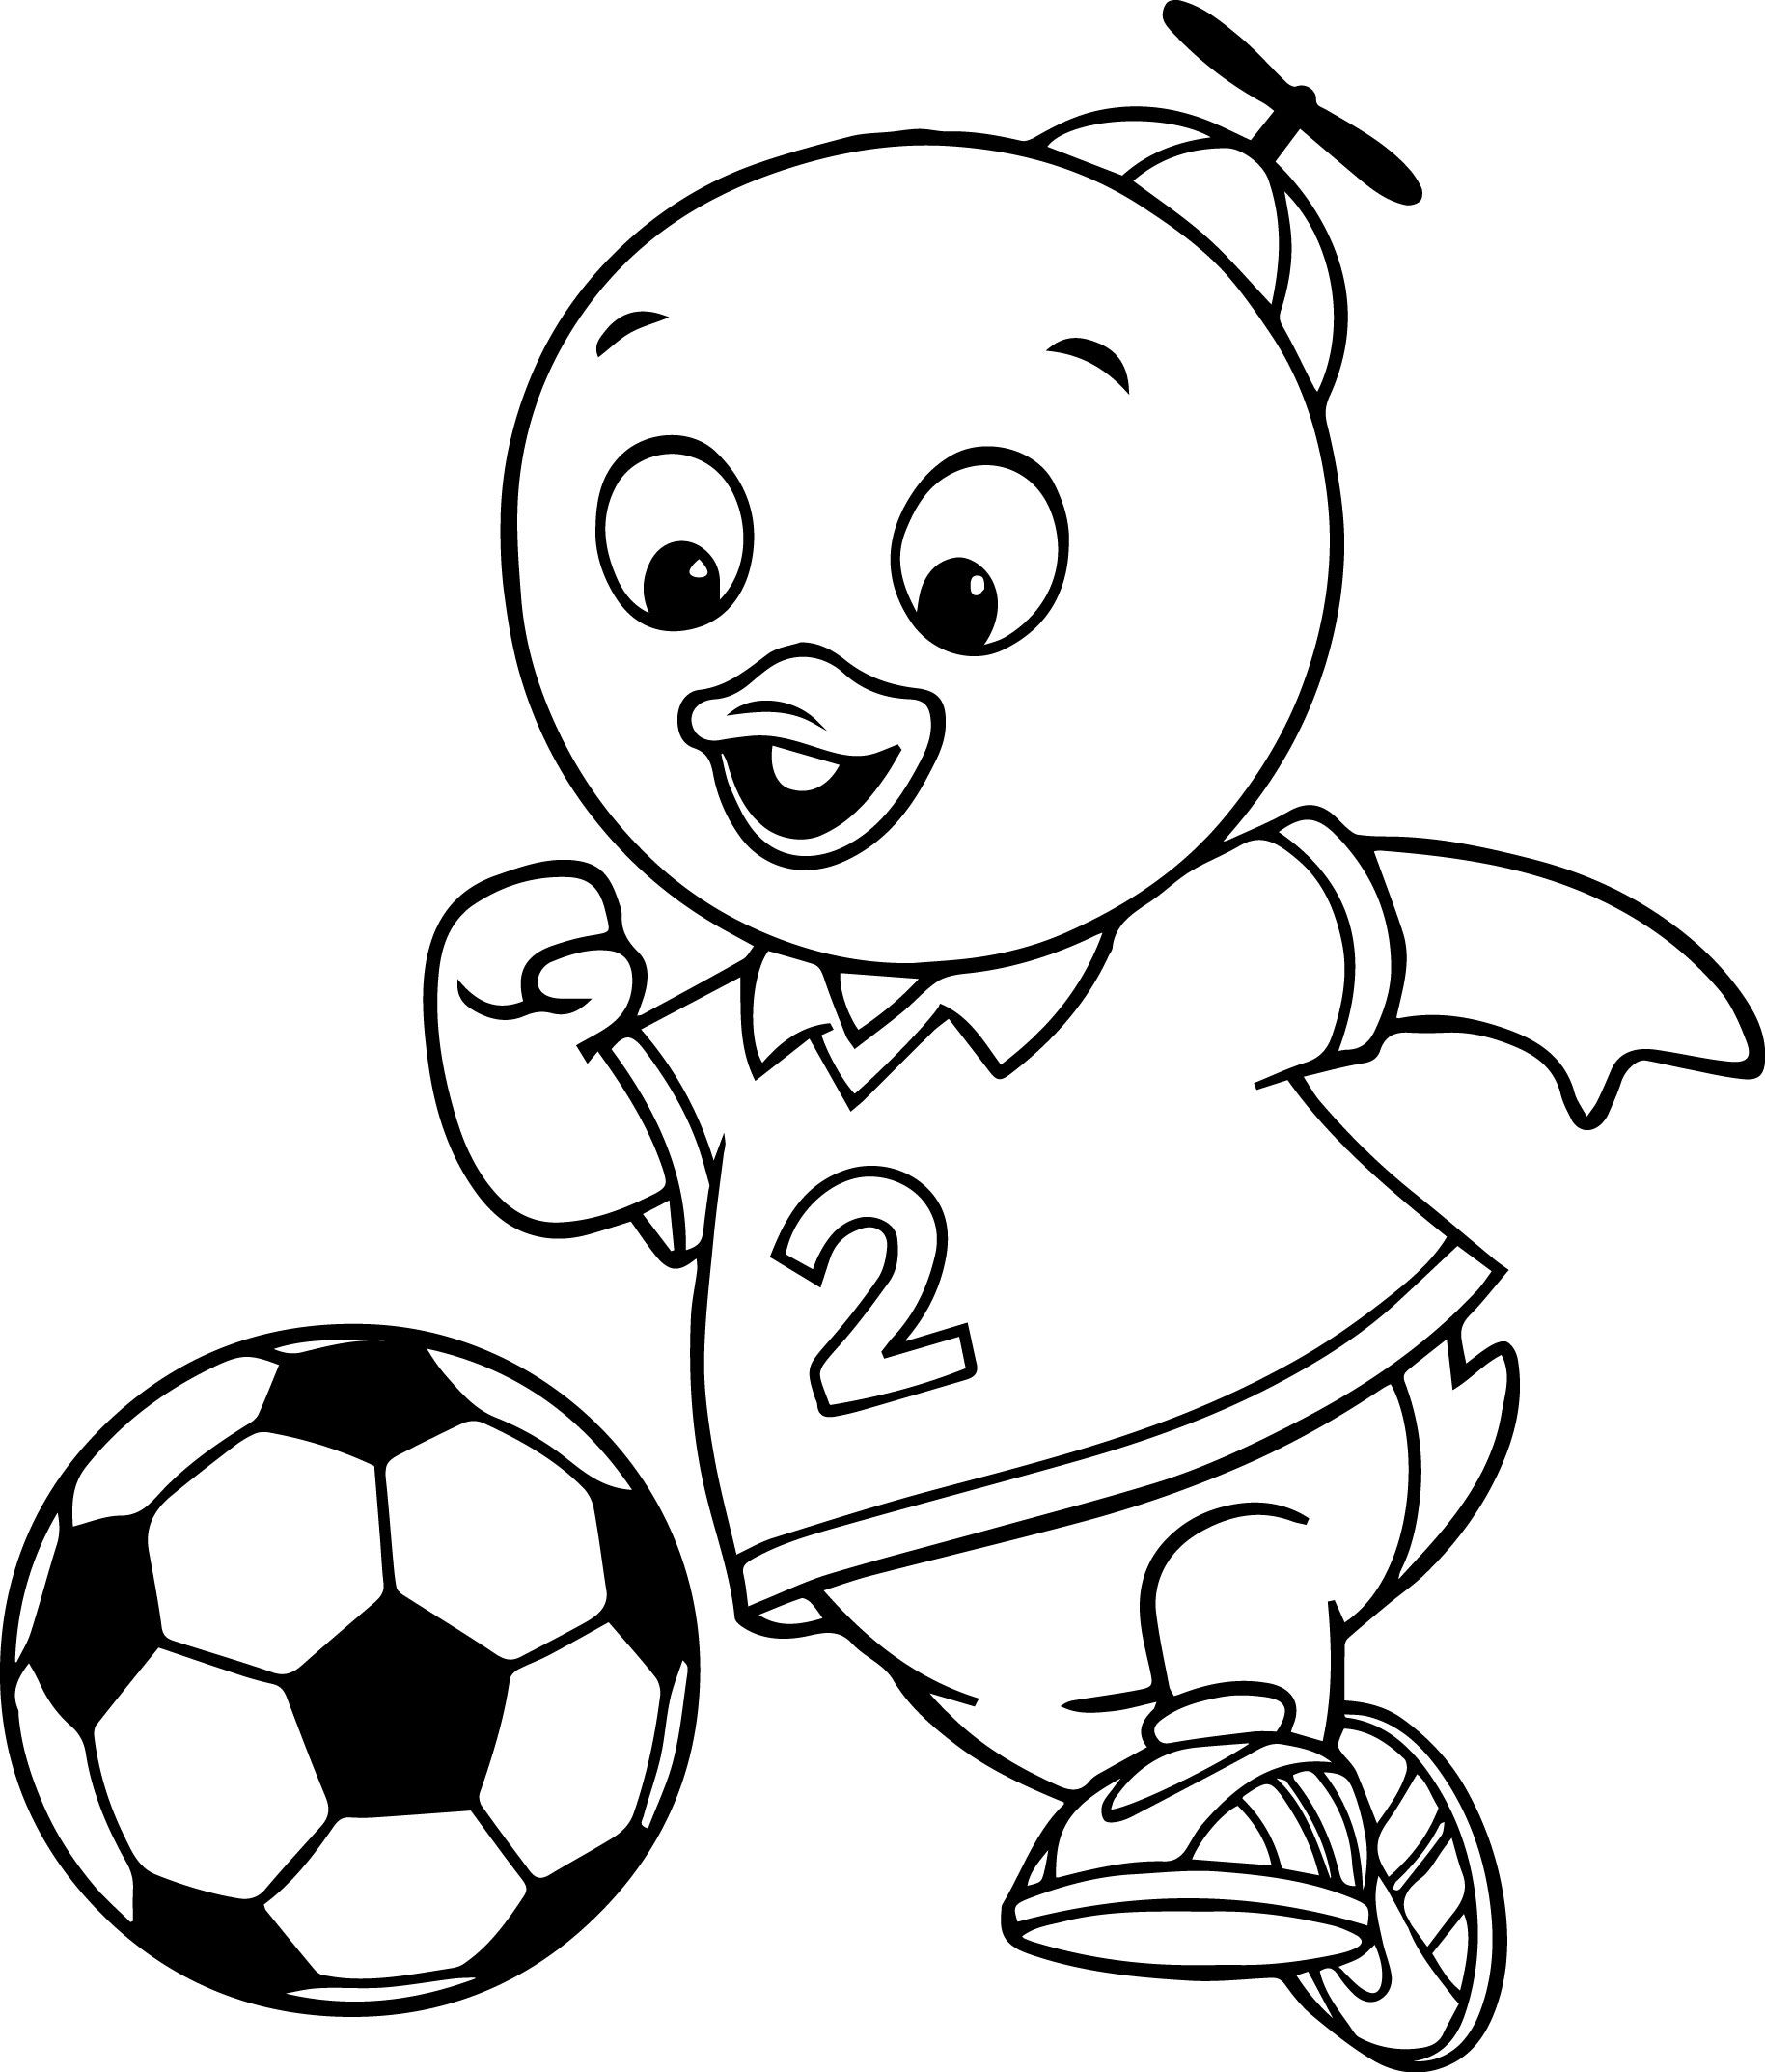 Pablo Coloring Pages - Free Printable Coloring Pages for Kids